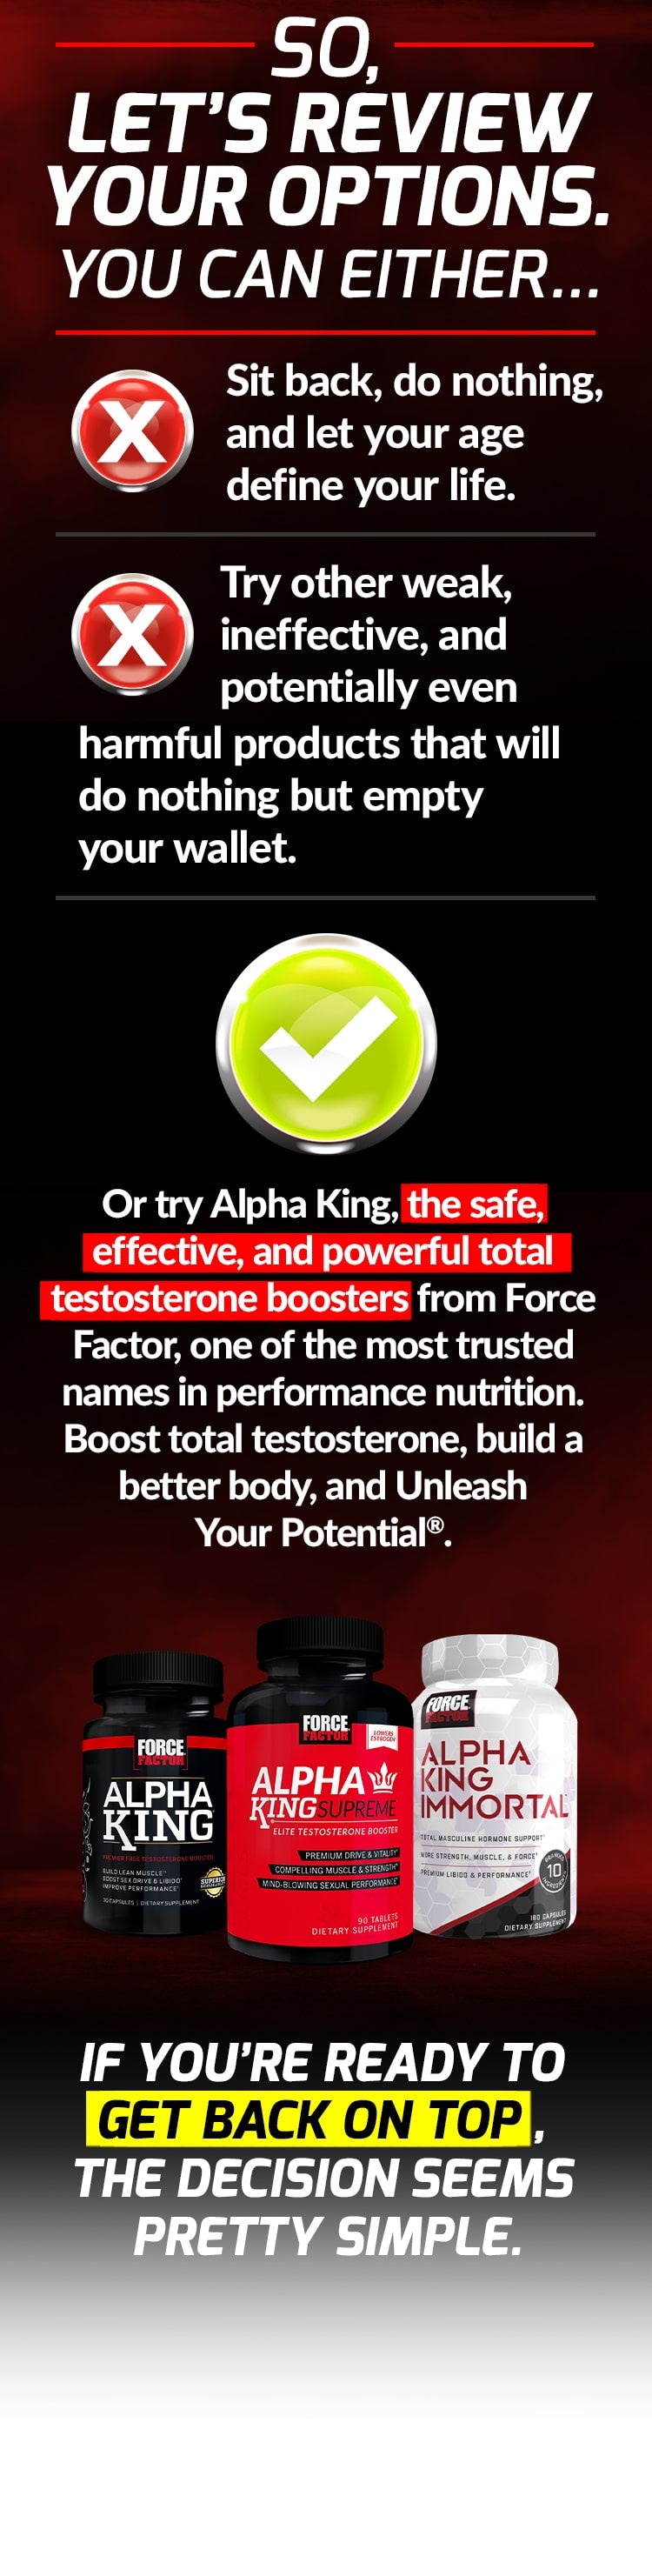 SO, LET’S REVIEW YOUR OPTIONS. YOU CAN EITHER... Sit back, do nothing, and let your age define your life. Try other weak, ineffective, and potentially even harmful products that will do nothing but empty your wallet. Or try Alpha King, the safe, effective, and powerful total testosterone boosters from Force Factor, one of the most trusted names in performance nutrition. Boost total testosterone, build a better body, and Unleash Your Potential®. IF YOU’RE READY TO GET BACK ON TOP, THE DECISION SEEMS PRETTY SIMPLE.